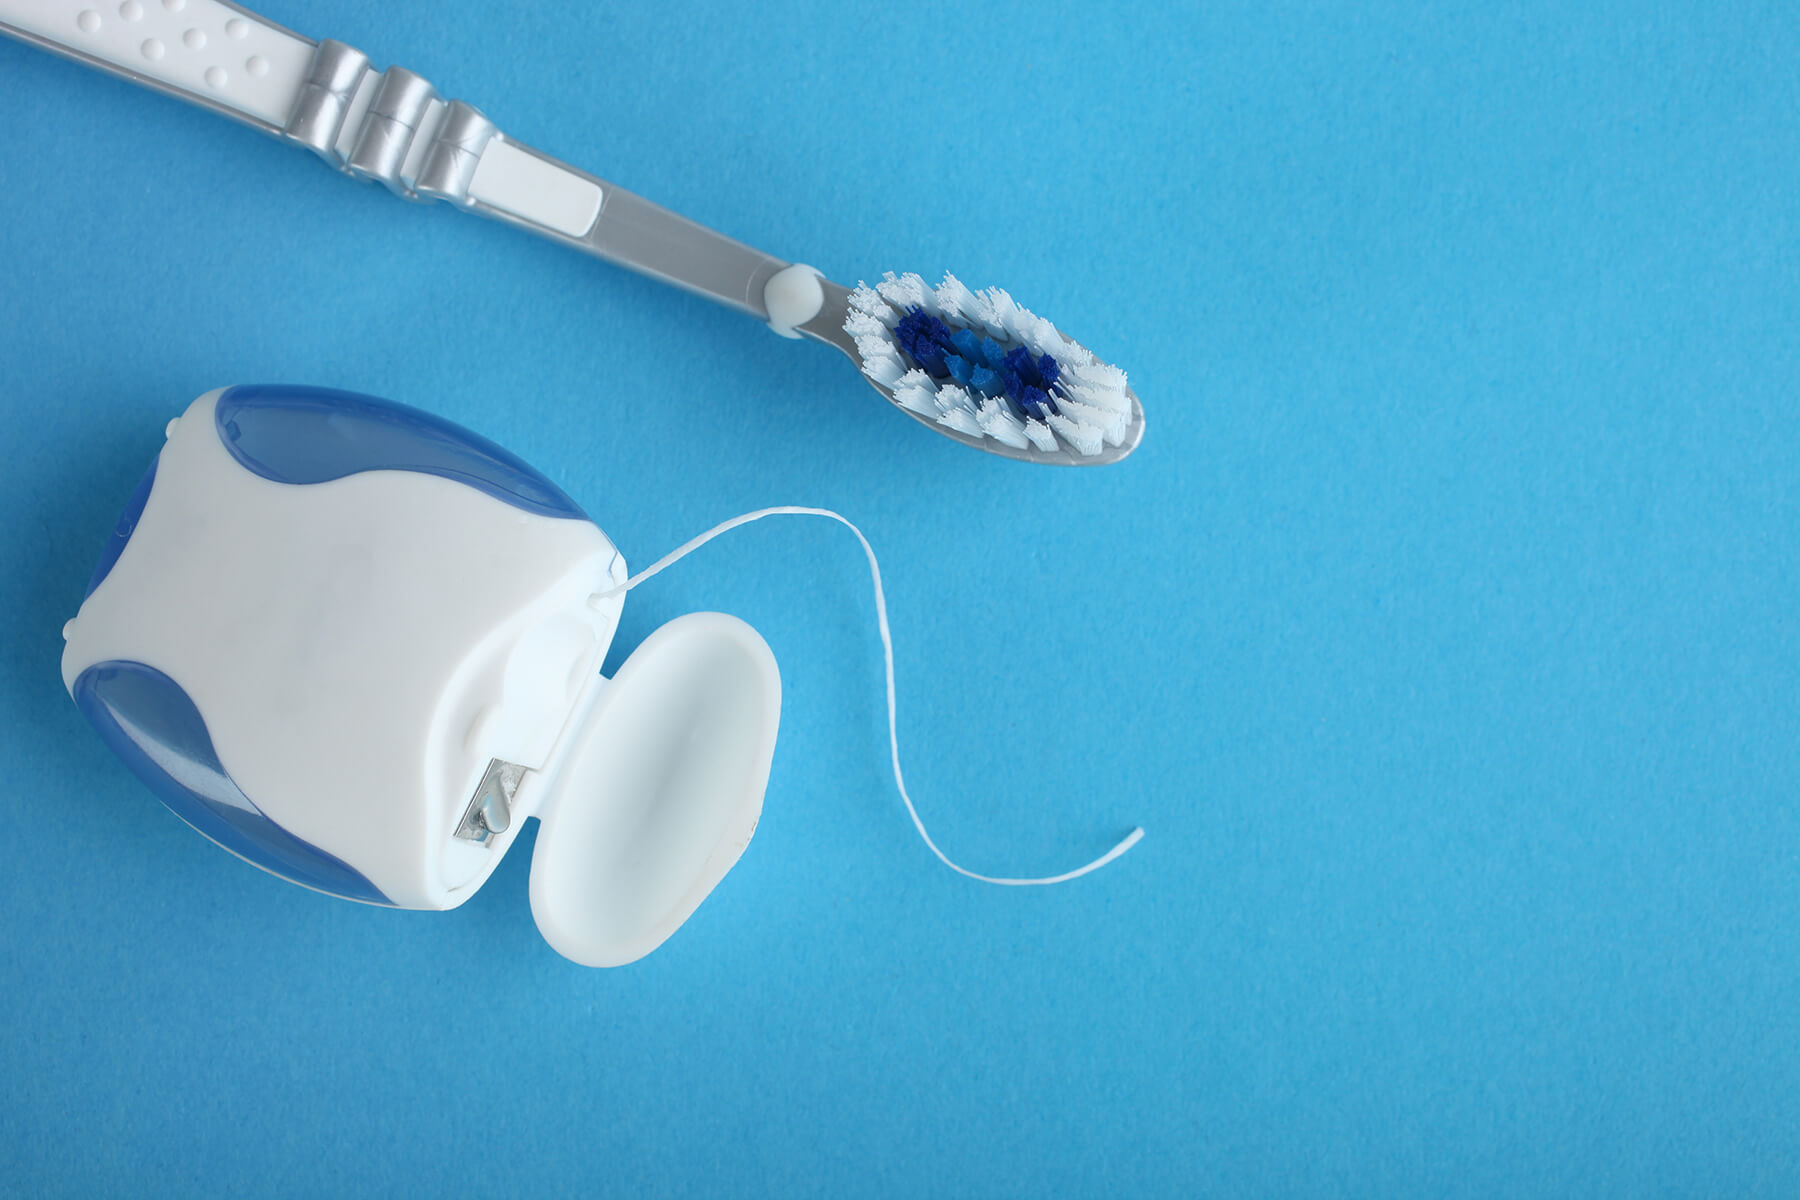 Toothbrush and floss laying on a table